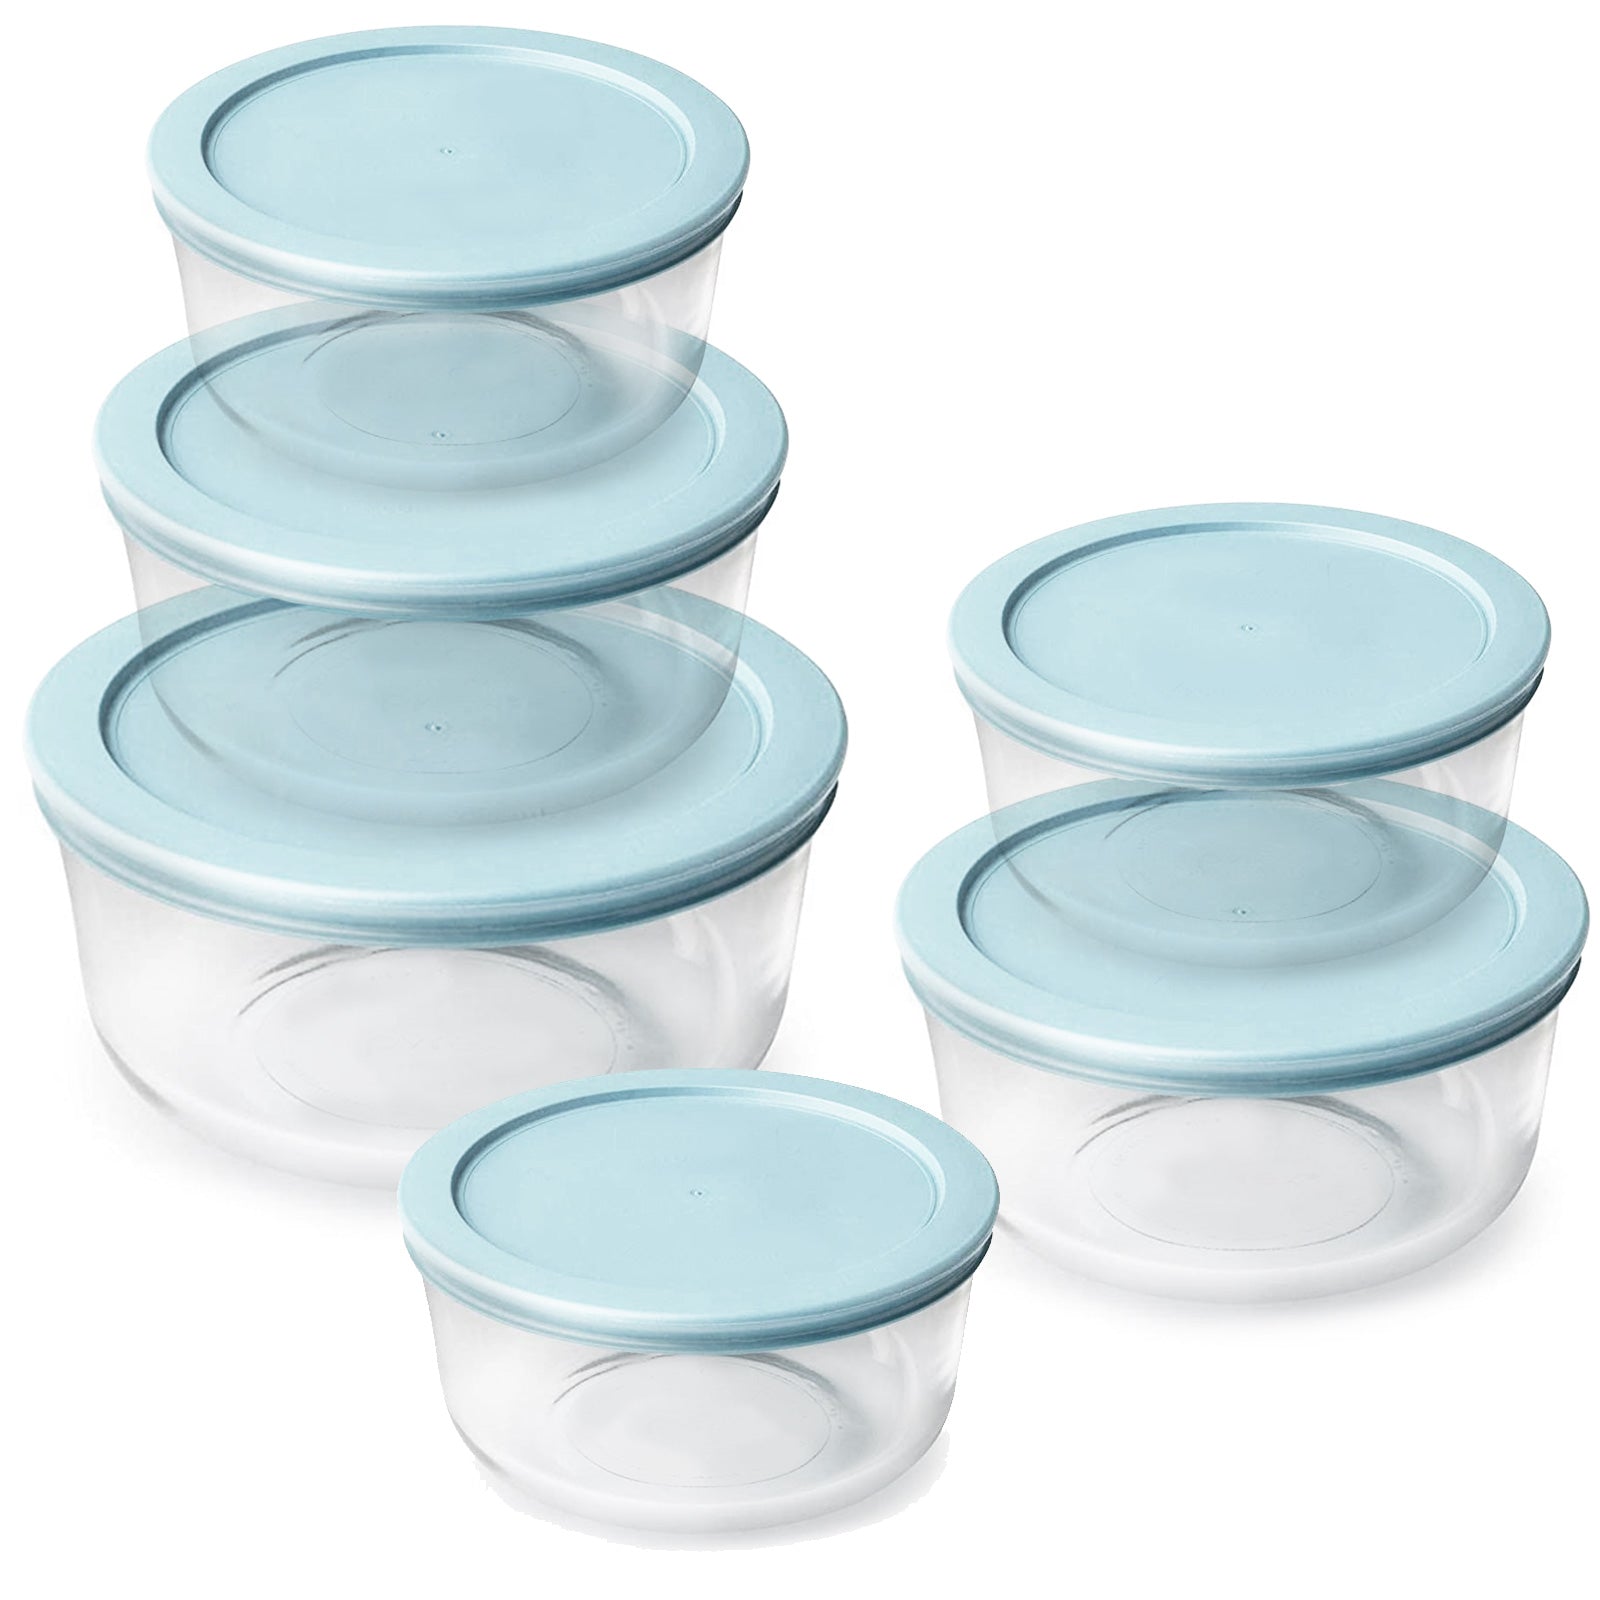 Mixing Bowl Set with Lids, Plastic Airtight Food Storage Containers, 6 Piece Set Plastic